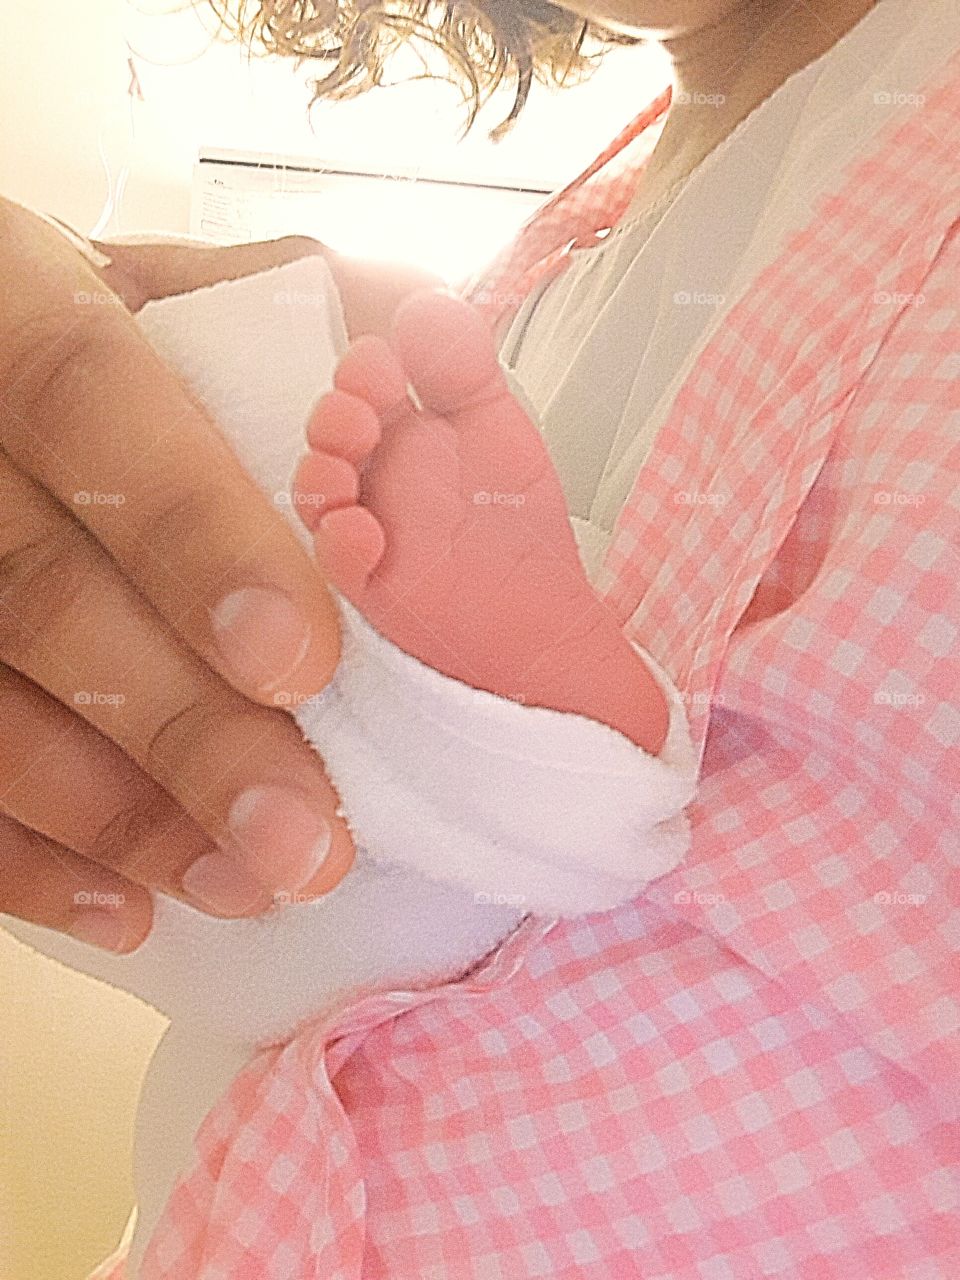 My baby little foot, new born, baby girl, I love her!